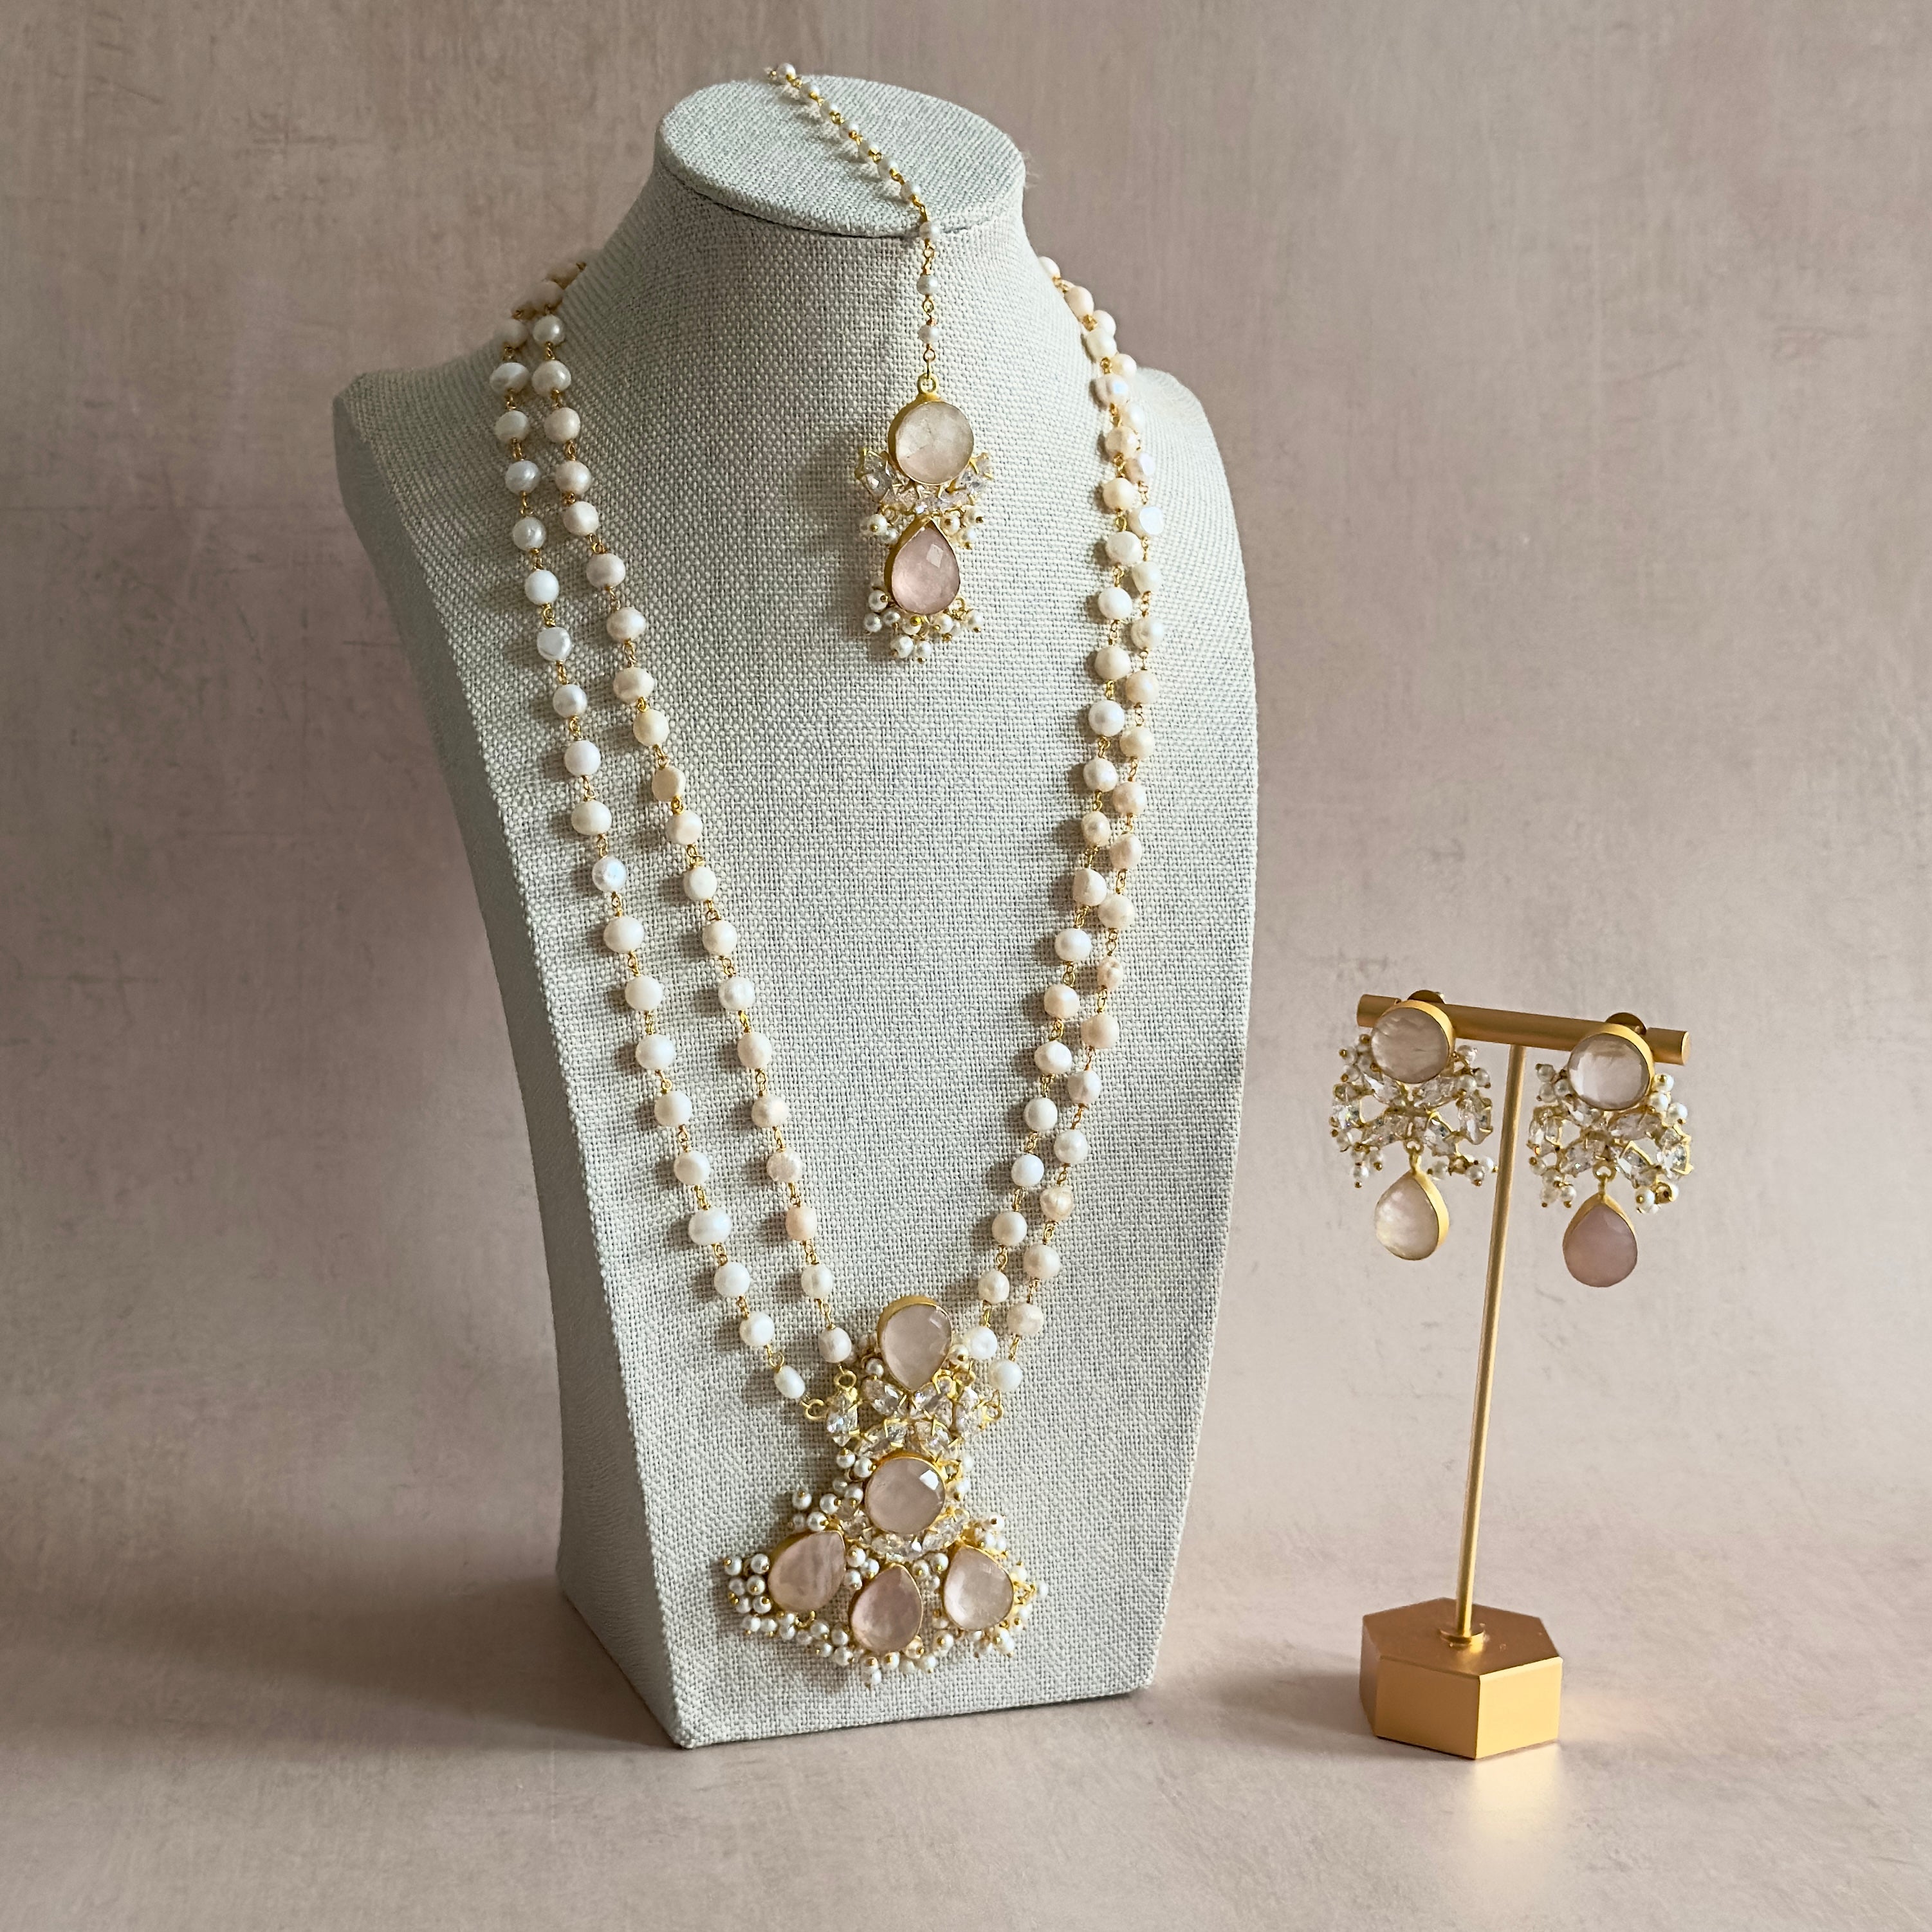 Indulge in the charming Romona Rose Mala Set! This stunning 3 piece set features&nbsp; natural rose quartz stones, complemented by a double pearl necklace and sparkling cz crystals. Complete with matching earrings and tikka, this set is sure to add a touch of elegance and beauty to any outfit.